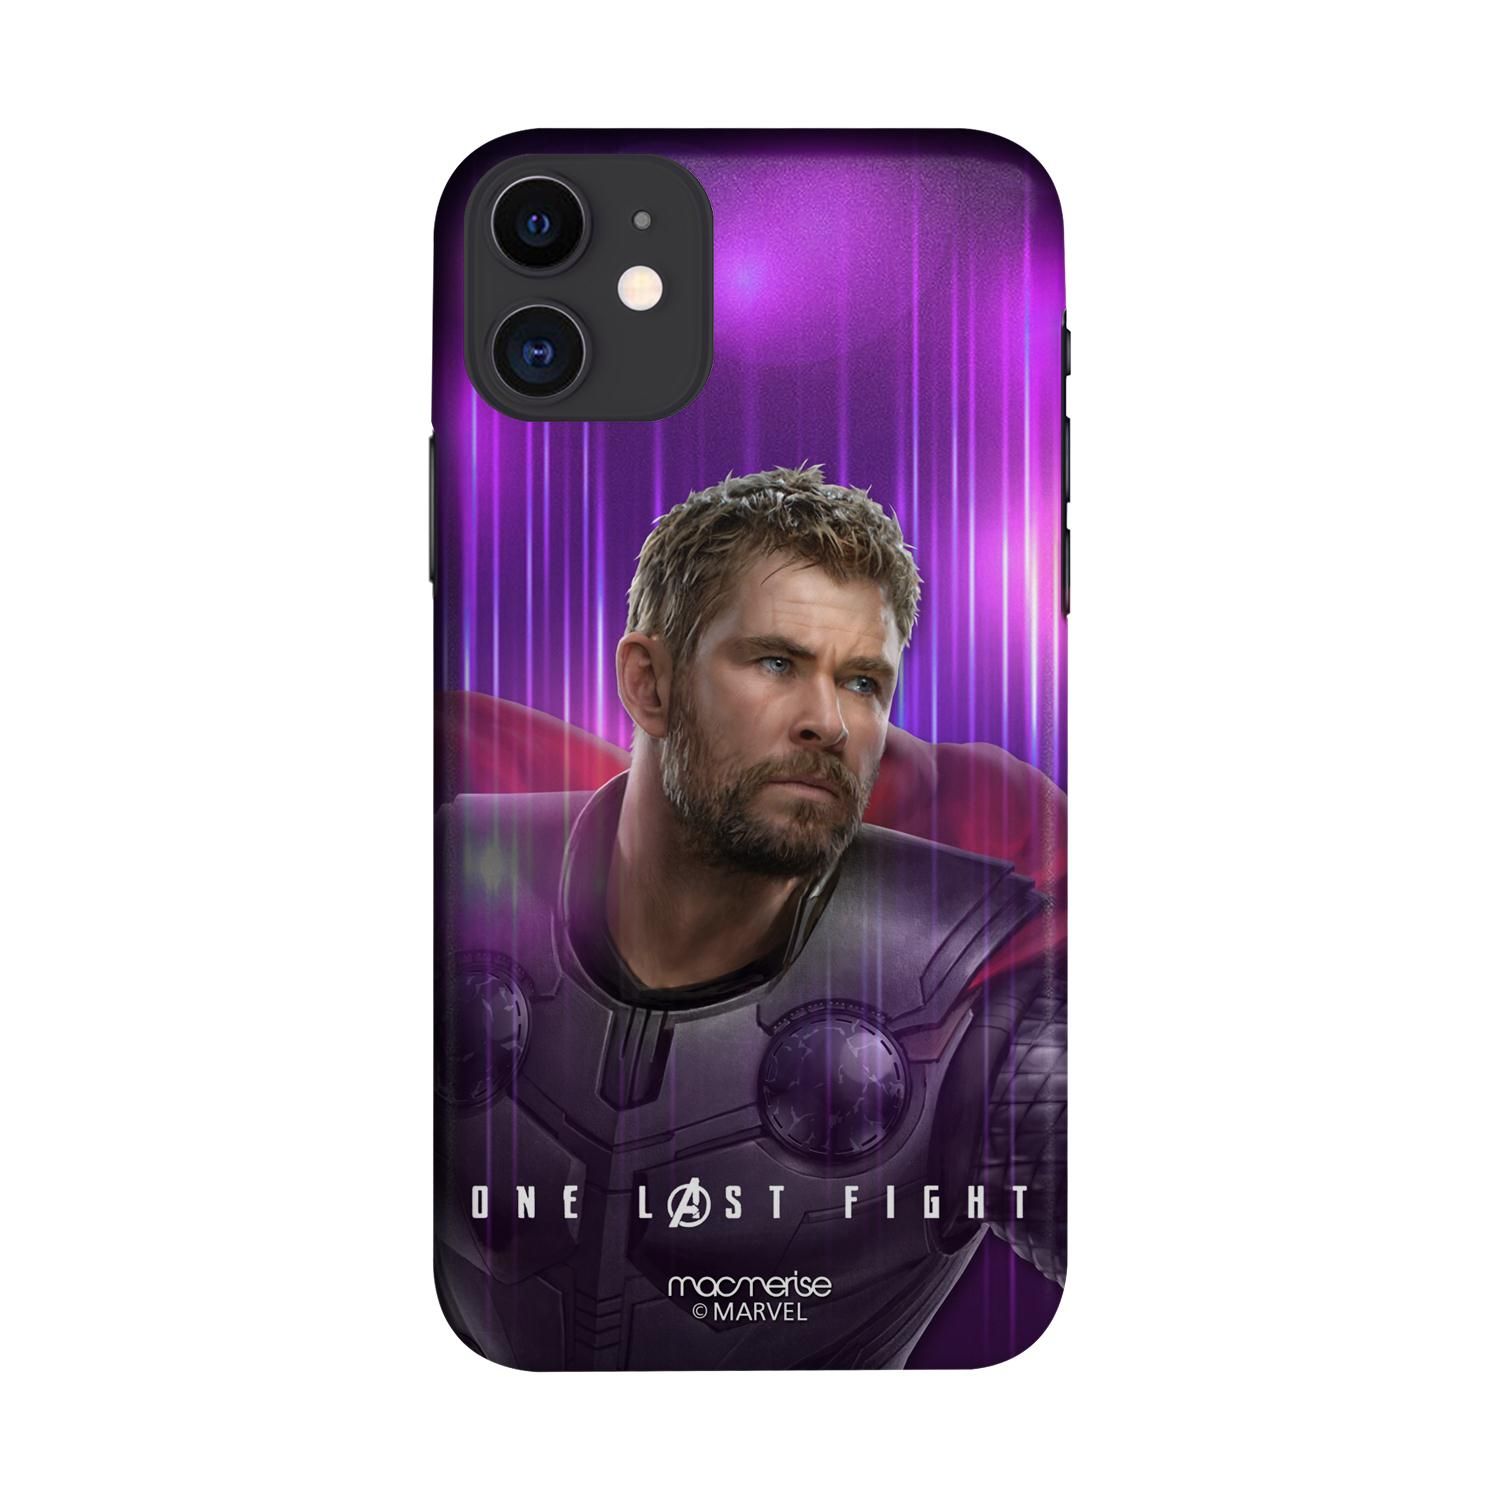 Buy One Last Fight - Sleek Phone Case for iPhone 11 Online